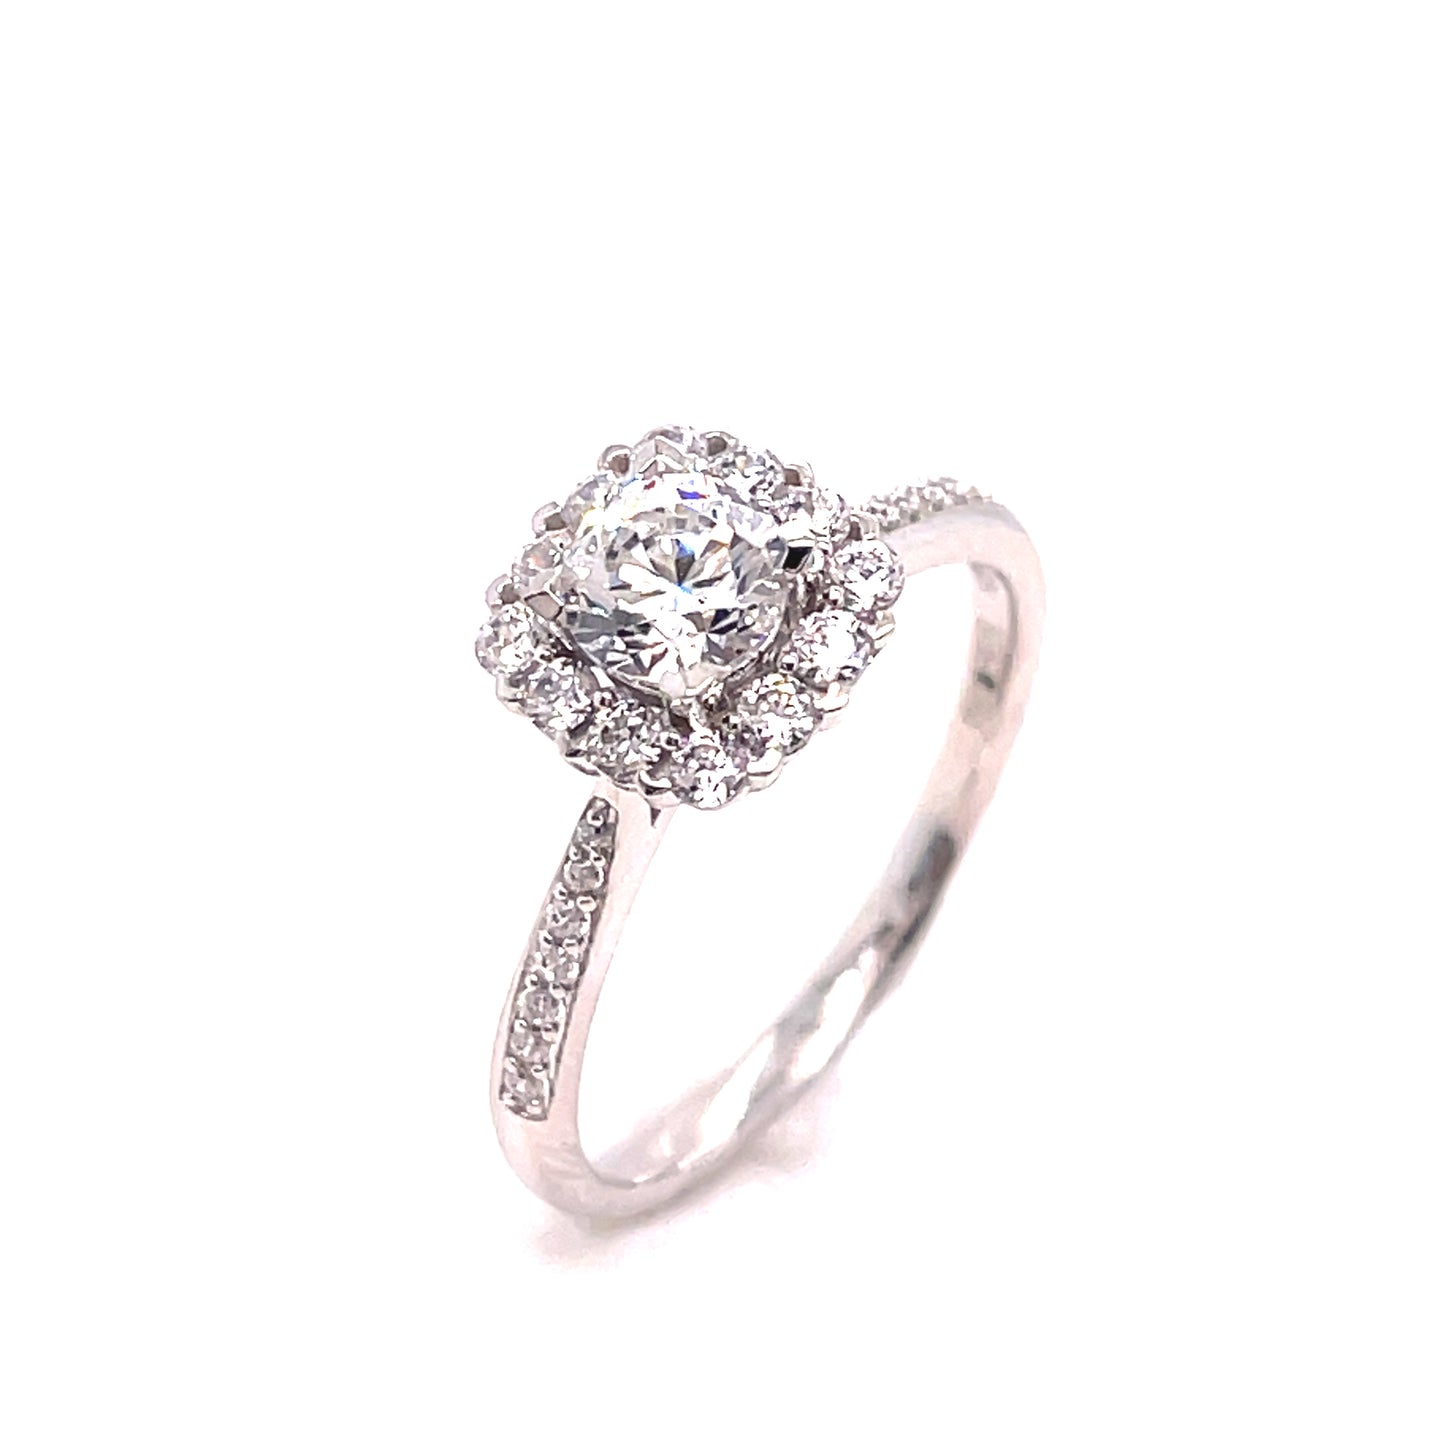 9ct White Gold Cushion Cut CZ Ring with CZ Halo and Shoulders